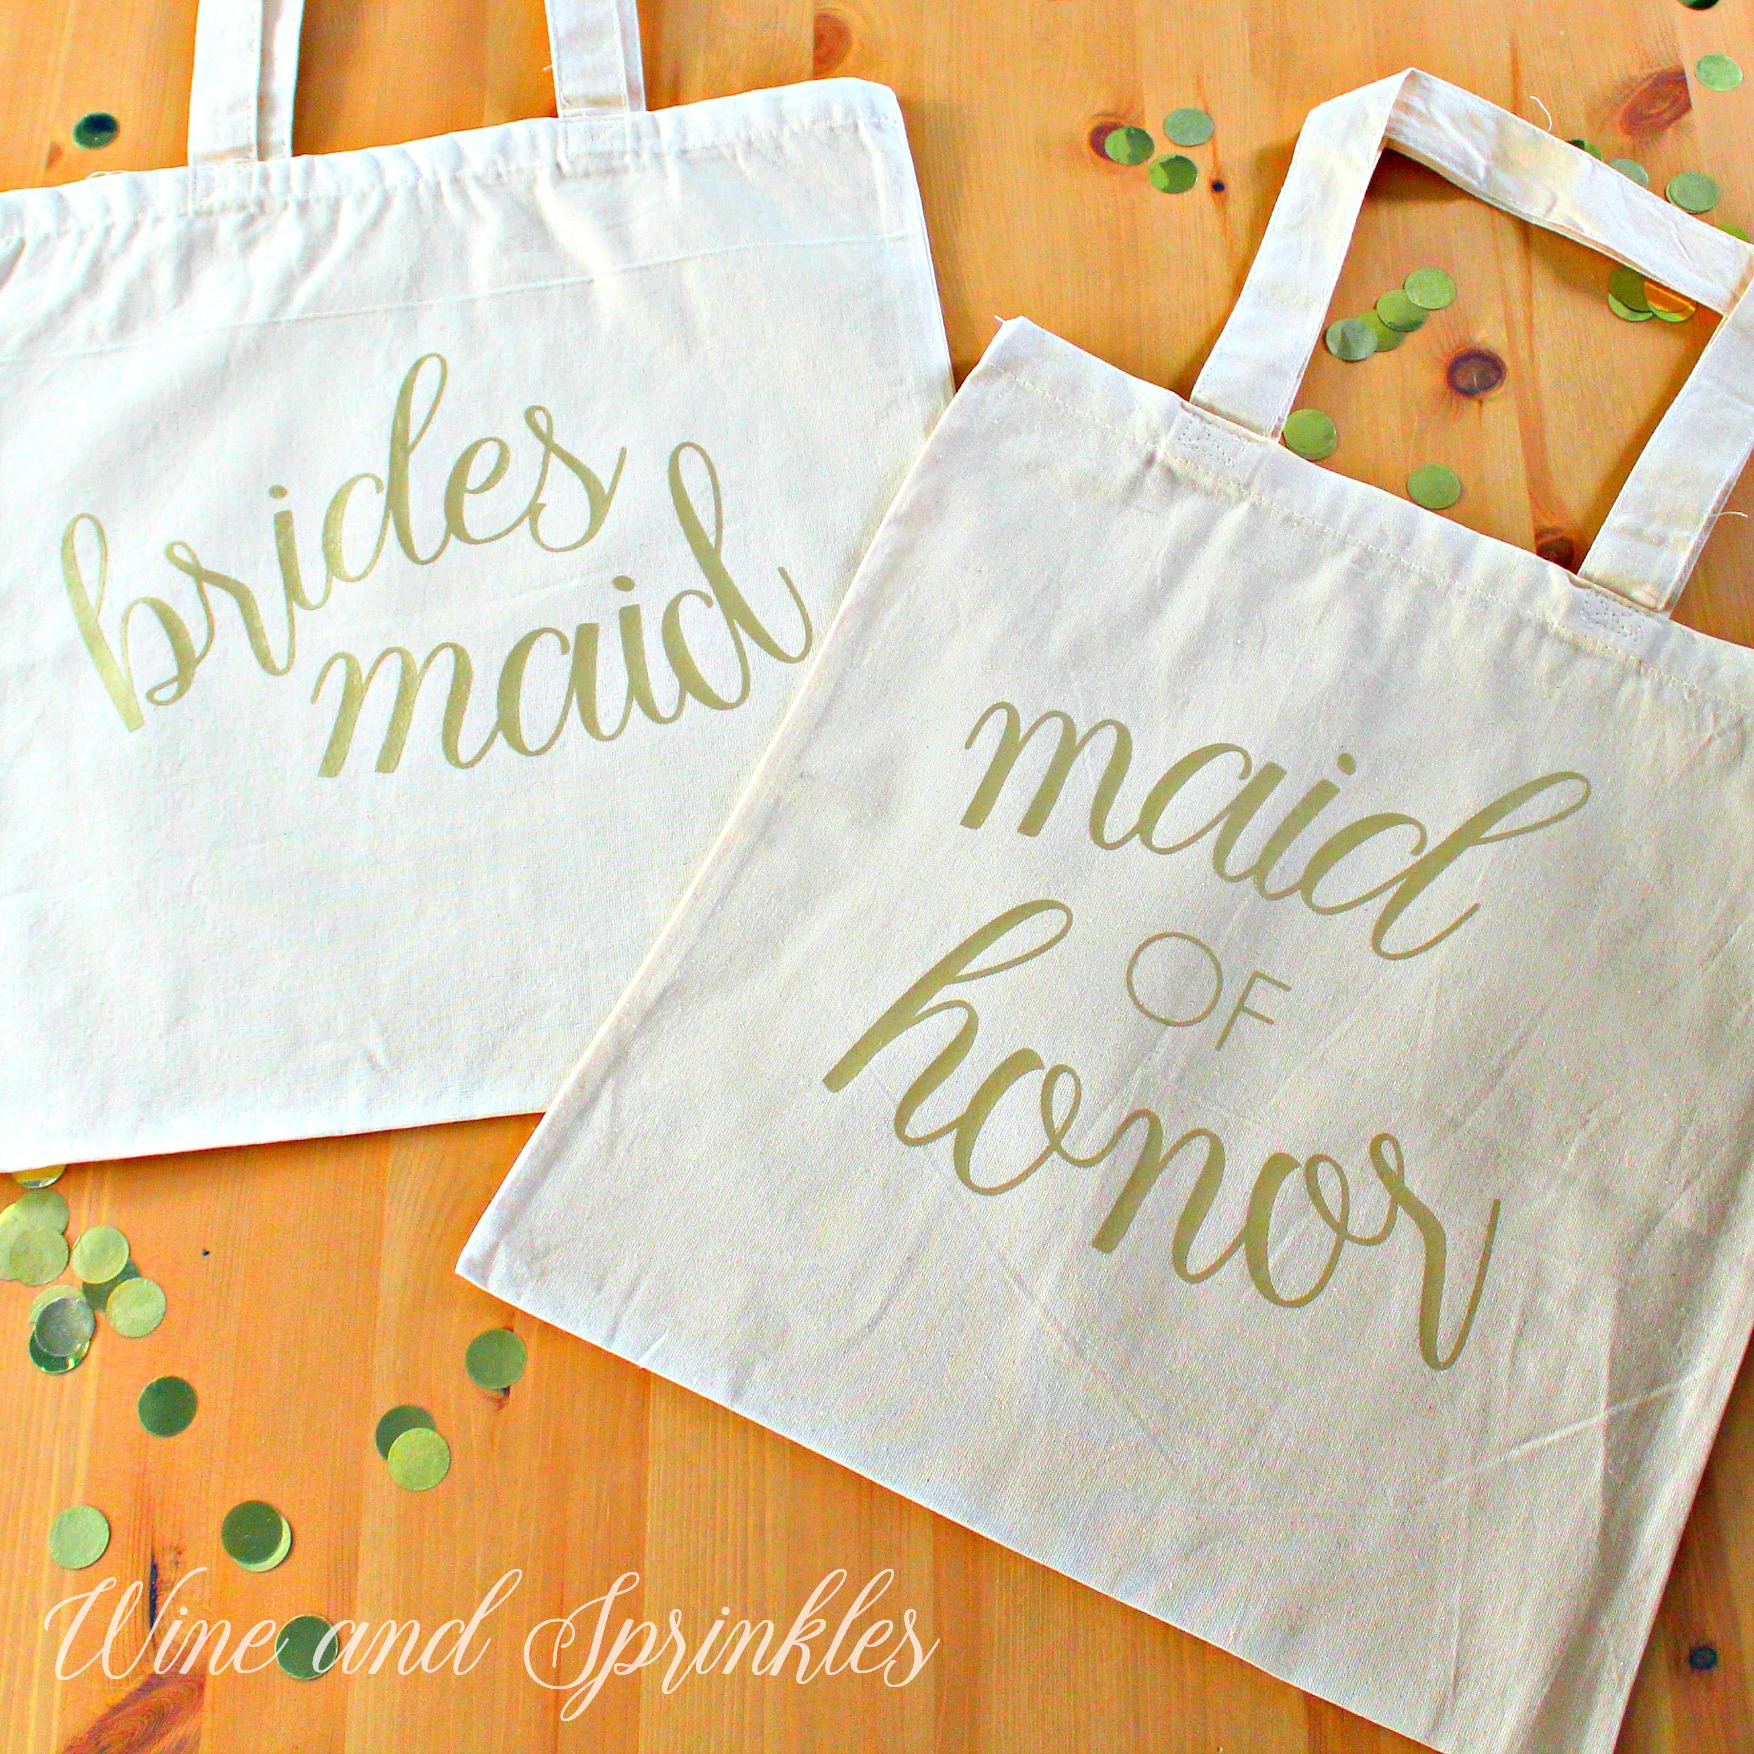 DIY Travel Tote Bag with Cricut EasyPress 2 - Mom Endeavors